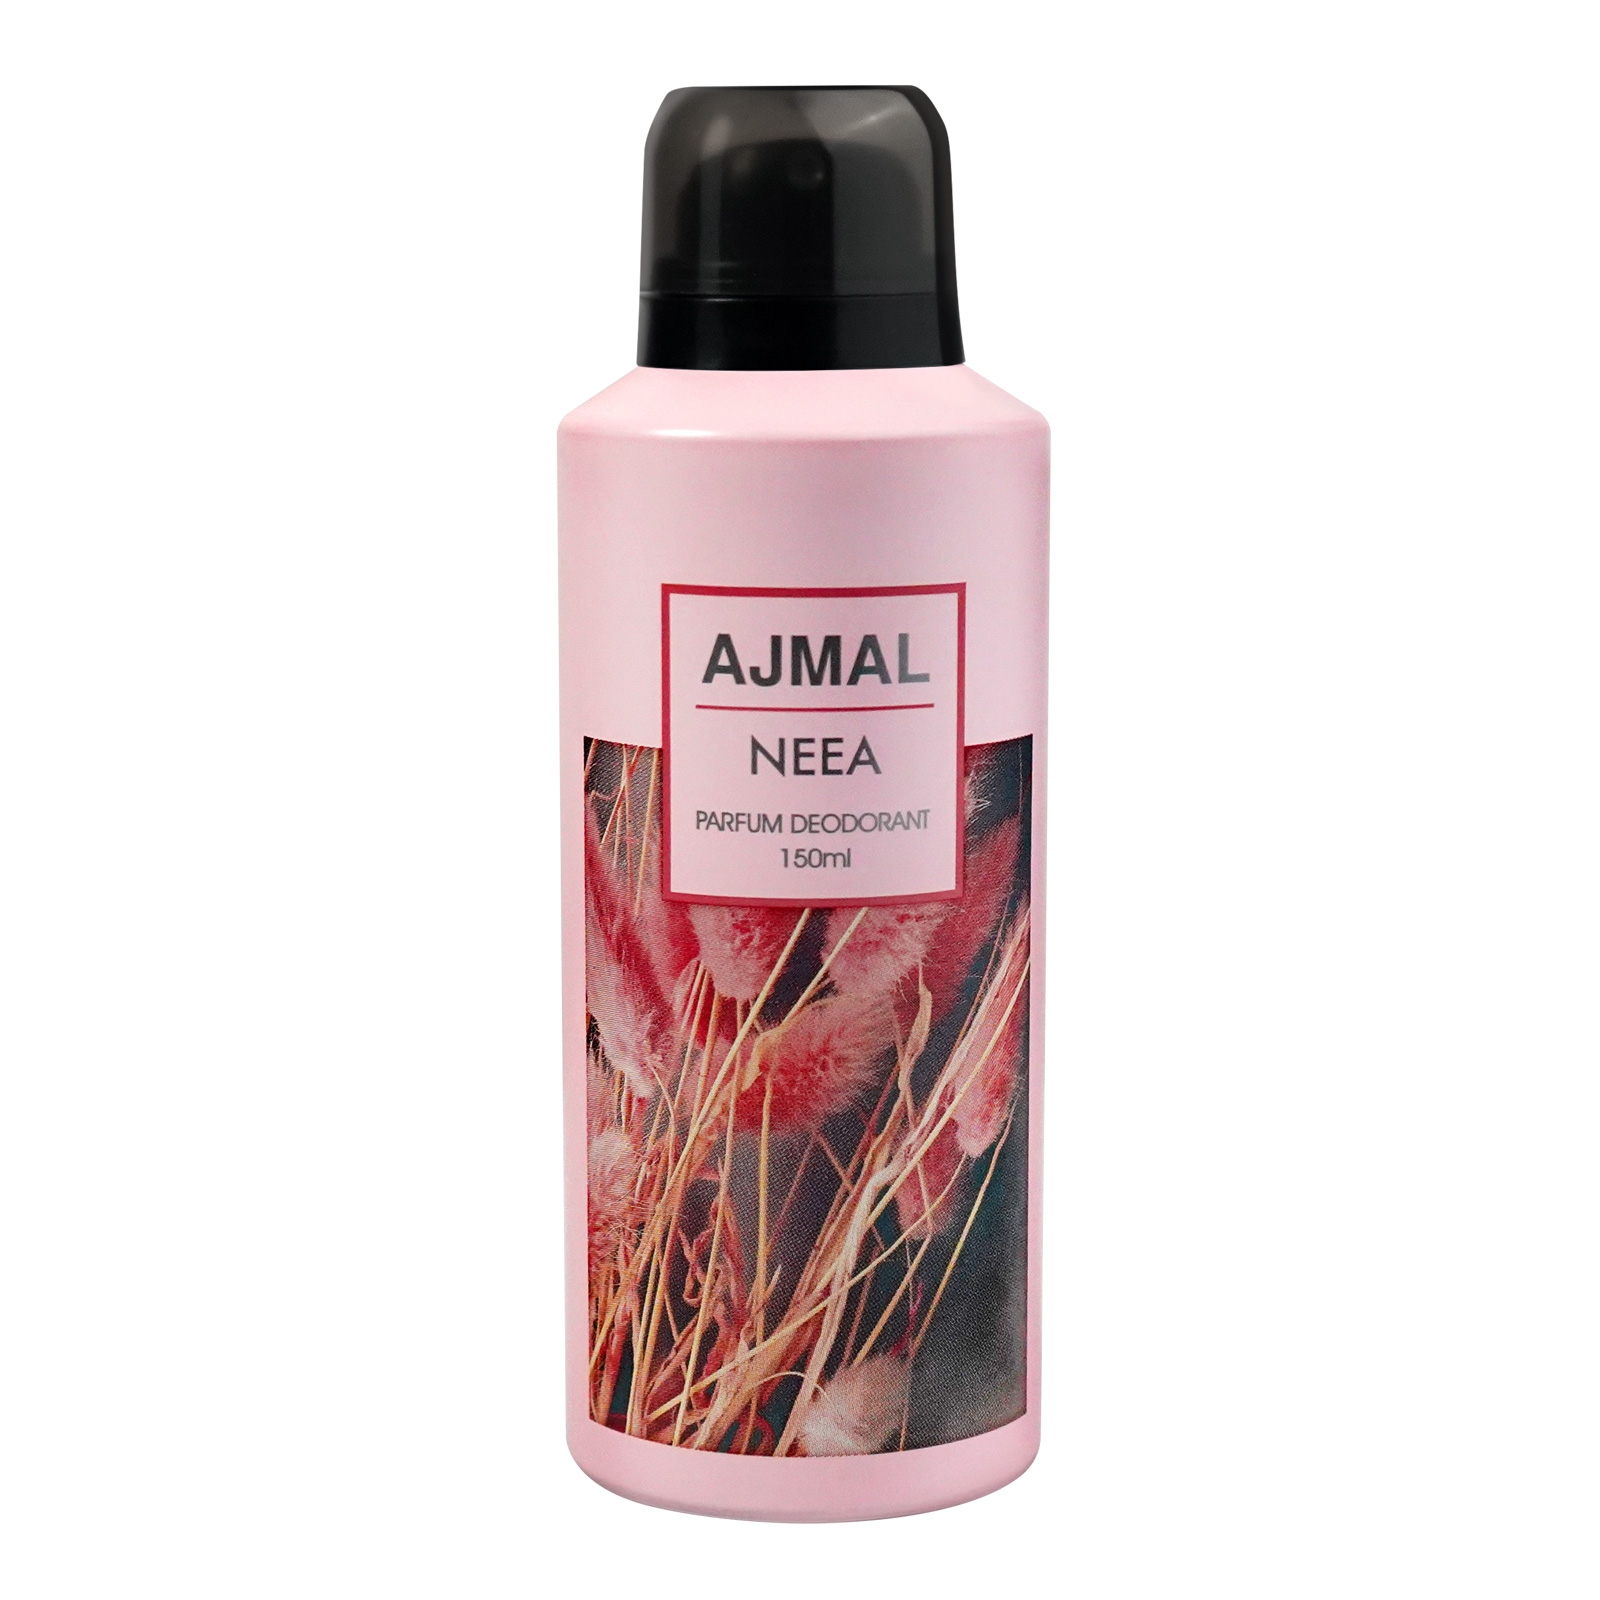 Ajmal | Ajmal Neea Deodorant Floral Perfume 150ML Long Lasting Scent Spray Party Wear Gift For Women.